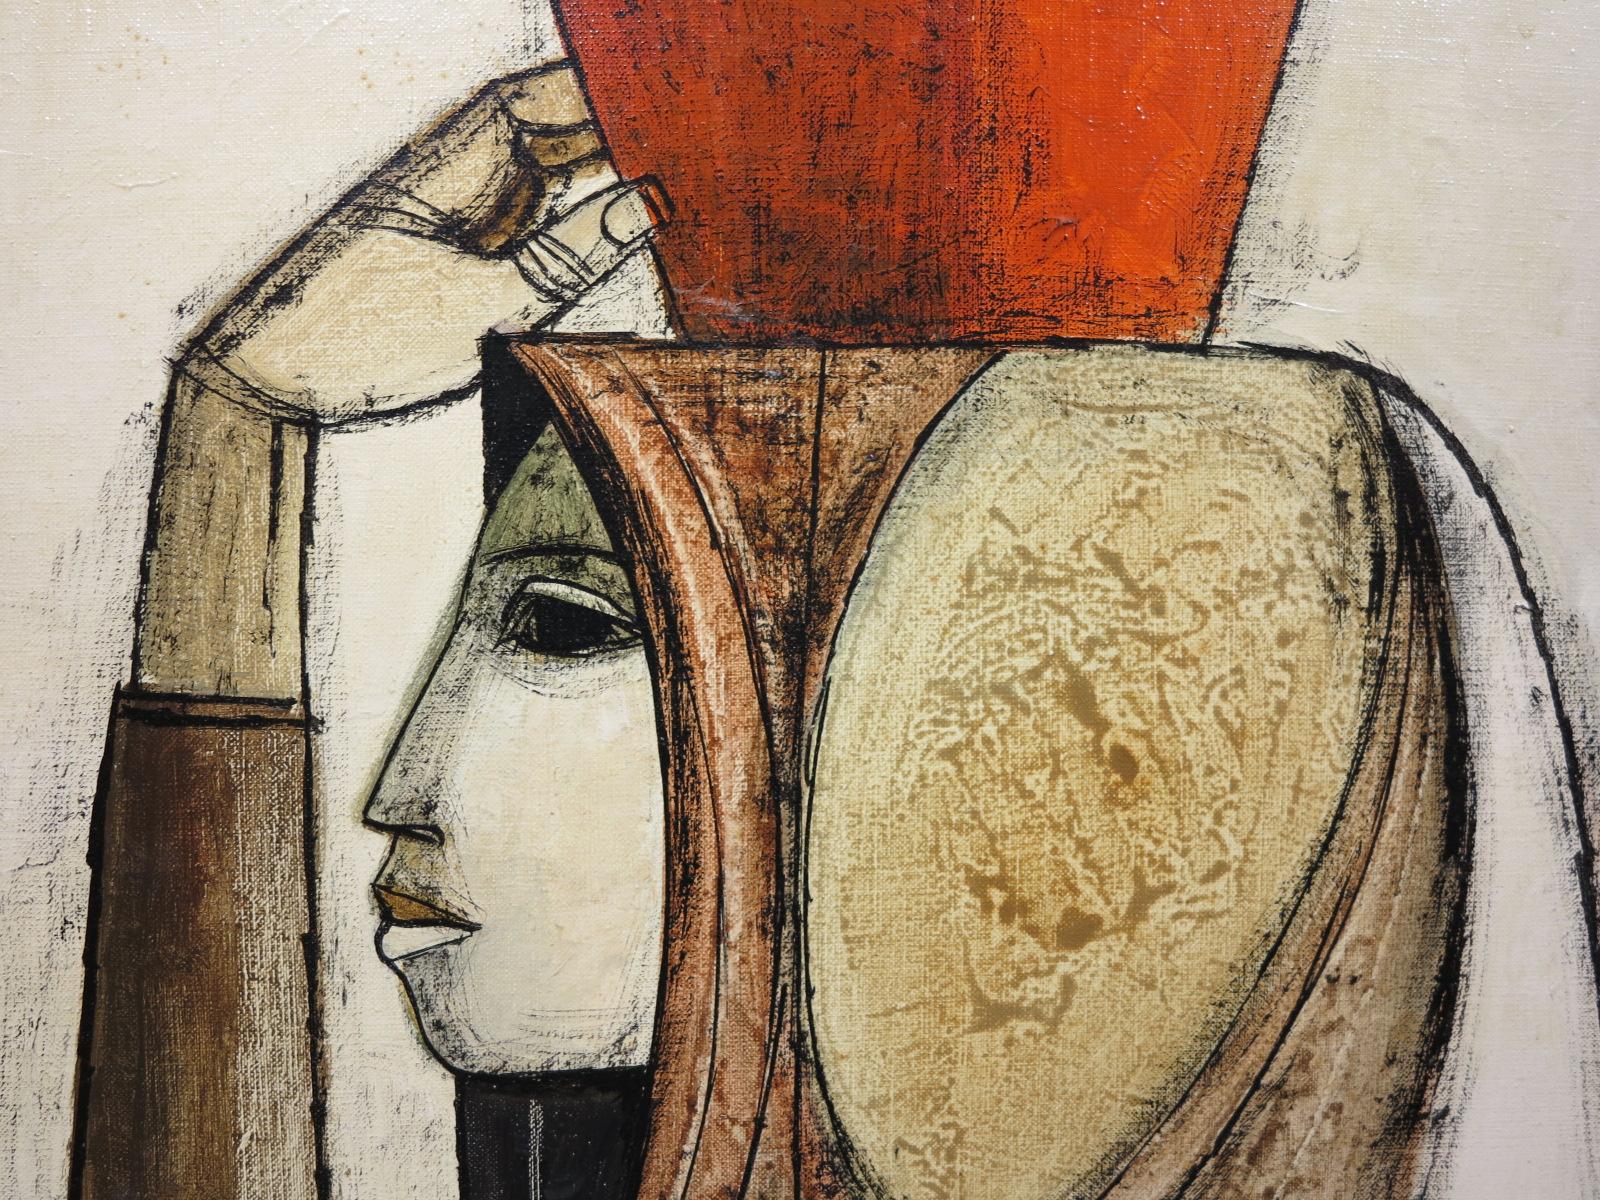 Beautiful figural abstract painting by Italian artist, Lucio Ranucci (b.1925). Three Figures, 1973. Oil on canvas, measures 24 x 36 inches; 26 x 38 inches framed. Signed and dated upper right. Excellent condition with no damage or conservation.